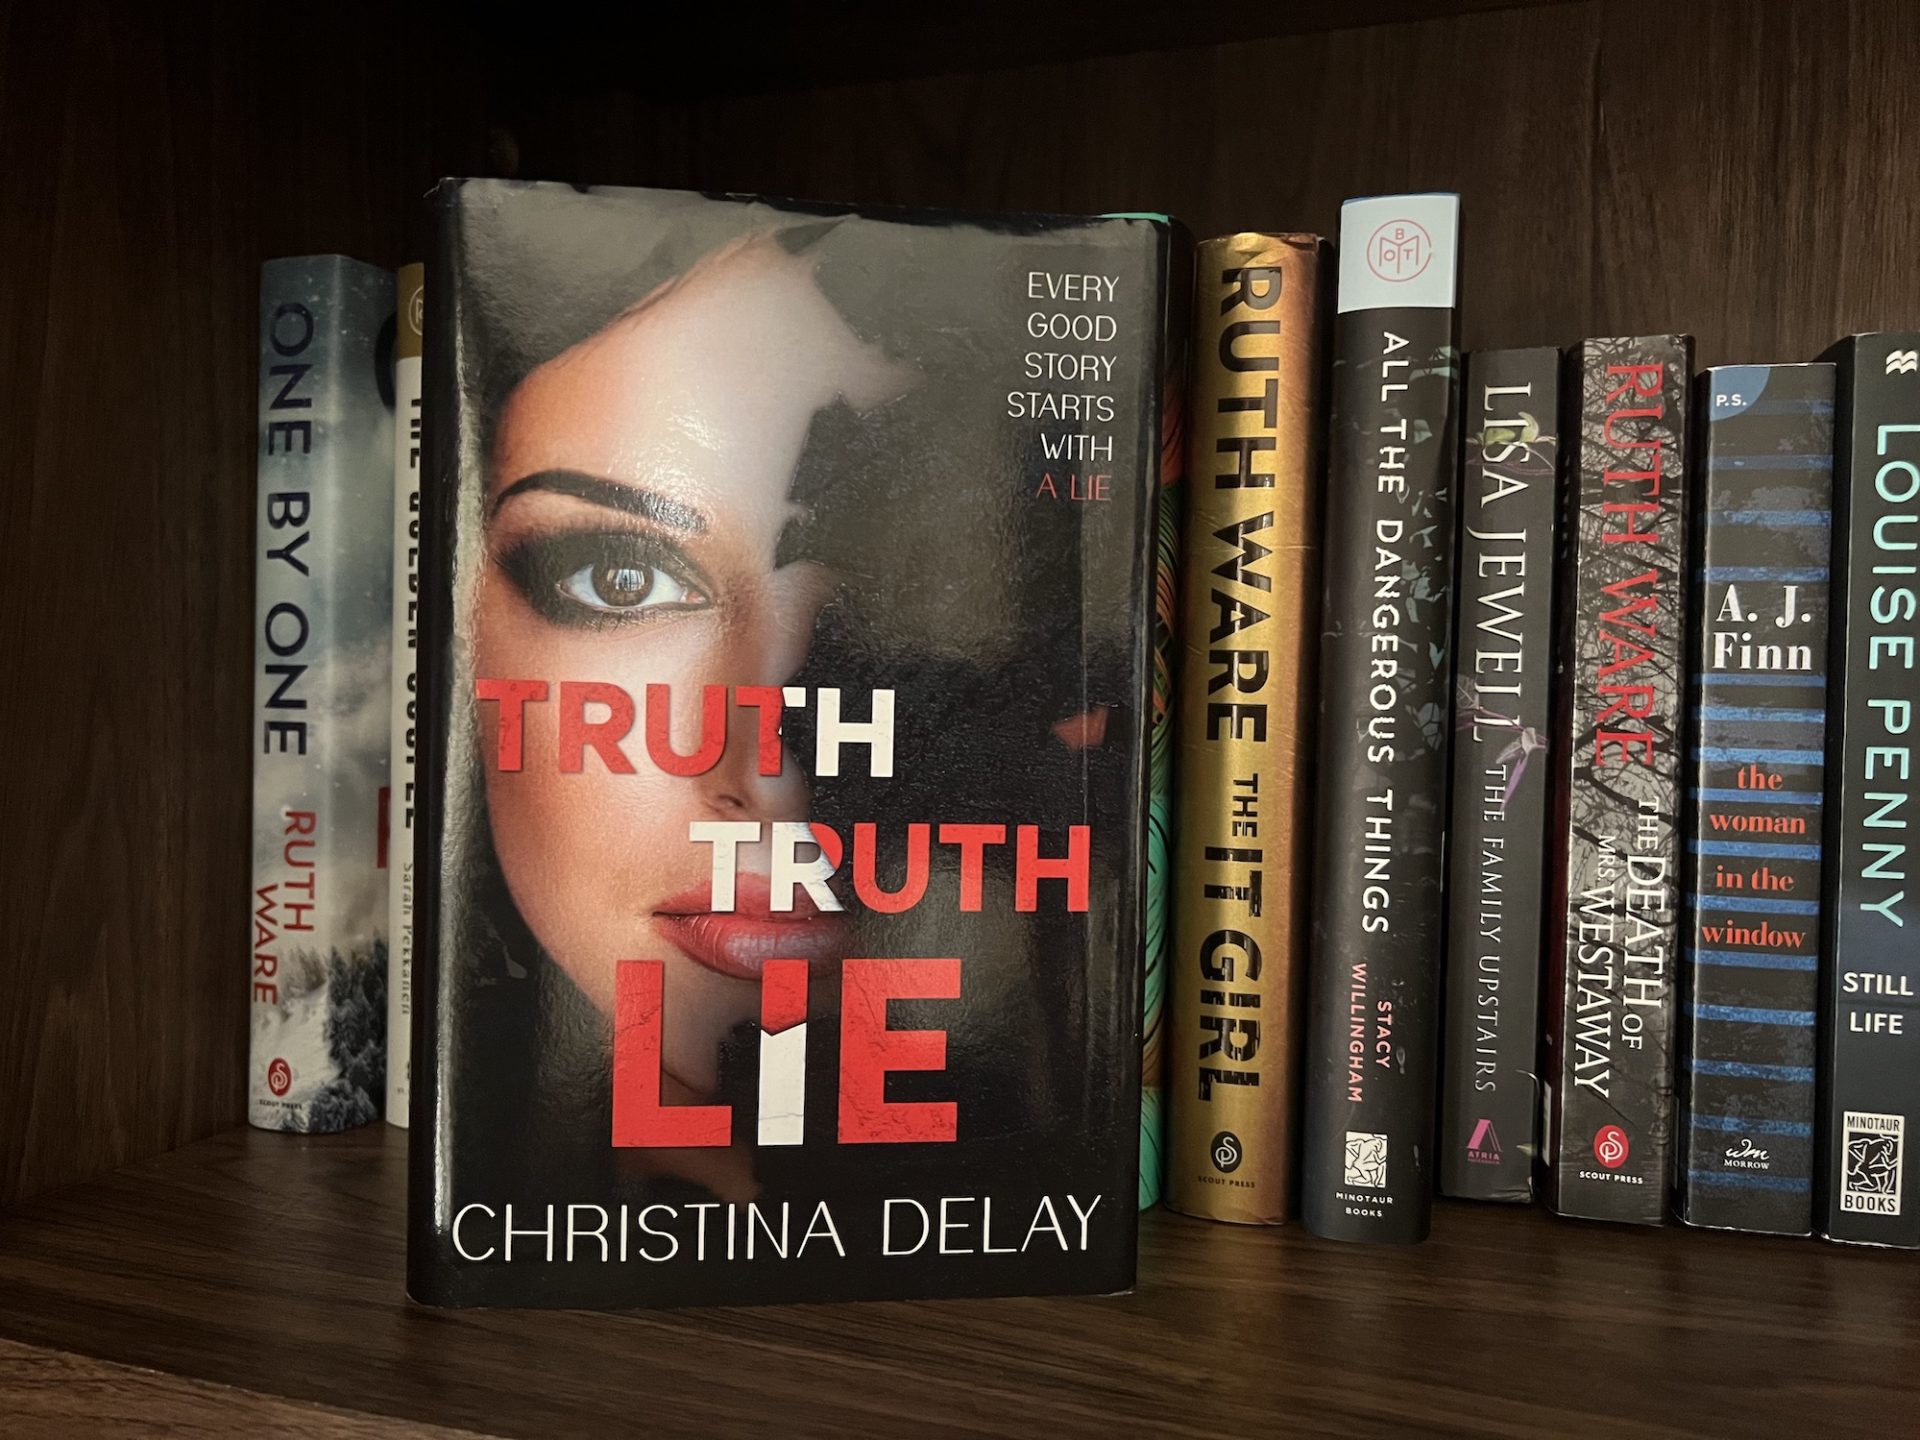 Truth Truth Lie is a fast-paced thriller that will keep you guessing until the very end